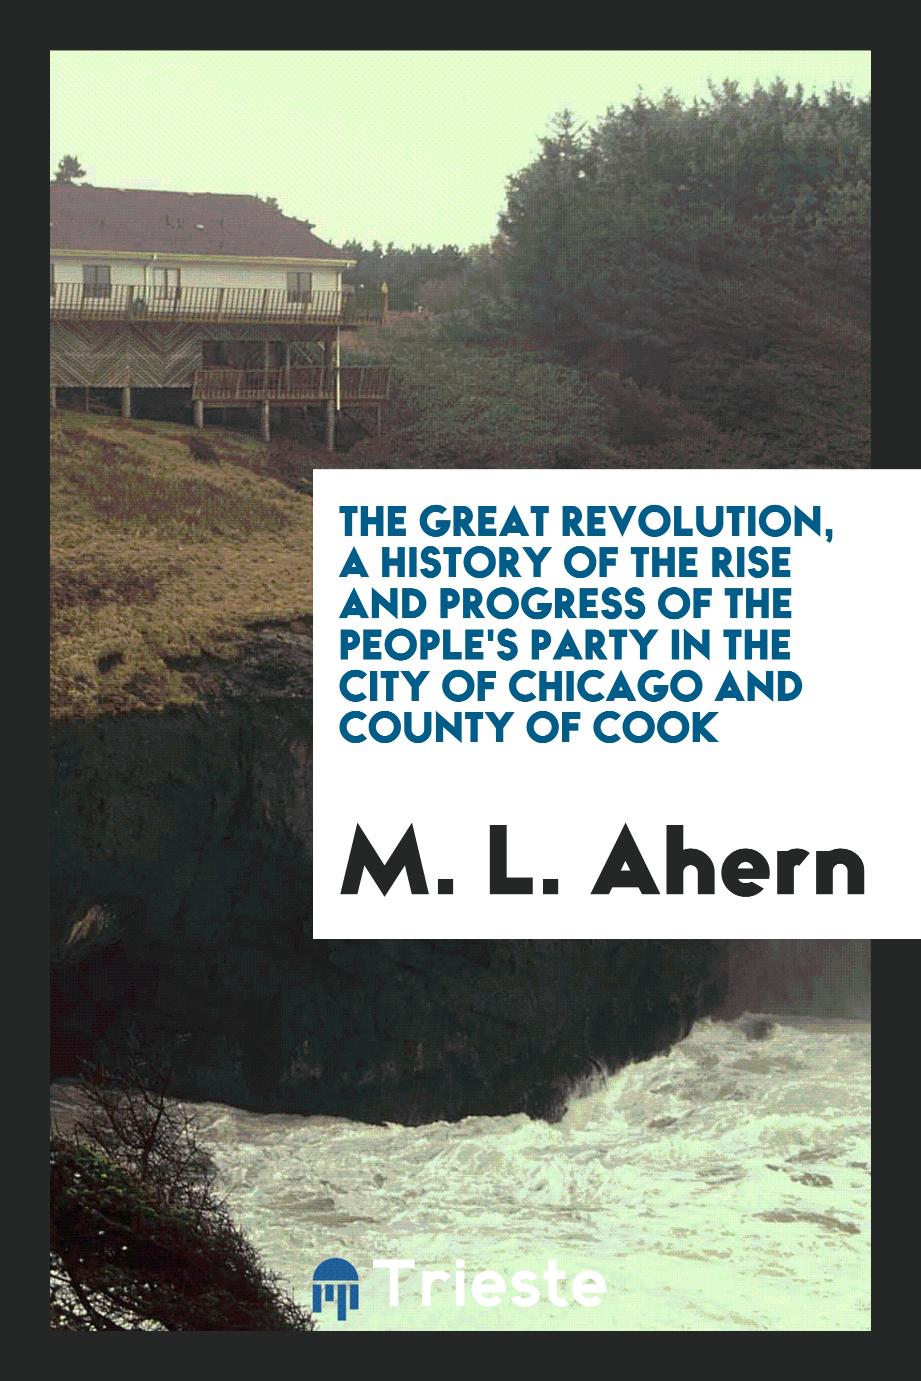 The great revolution, a history of the rise and progress of the People's Party in the city of Chicago and county of Cook